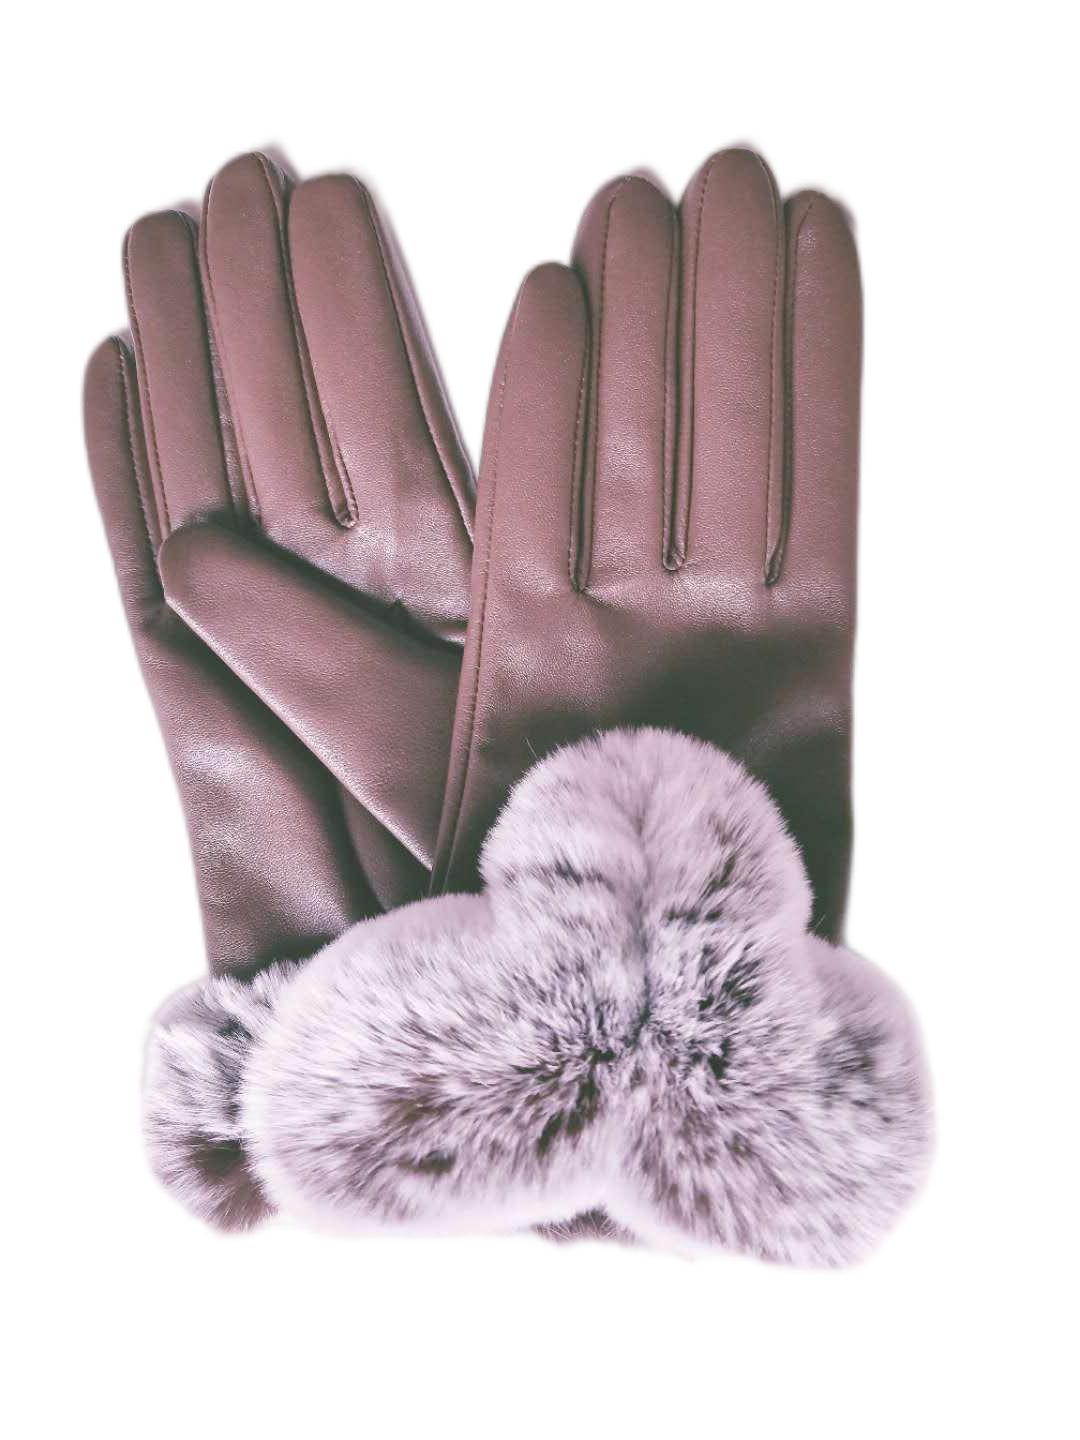  touch screen lamb leather gloves